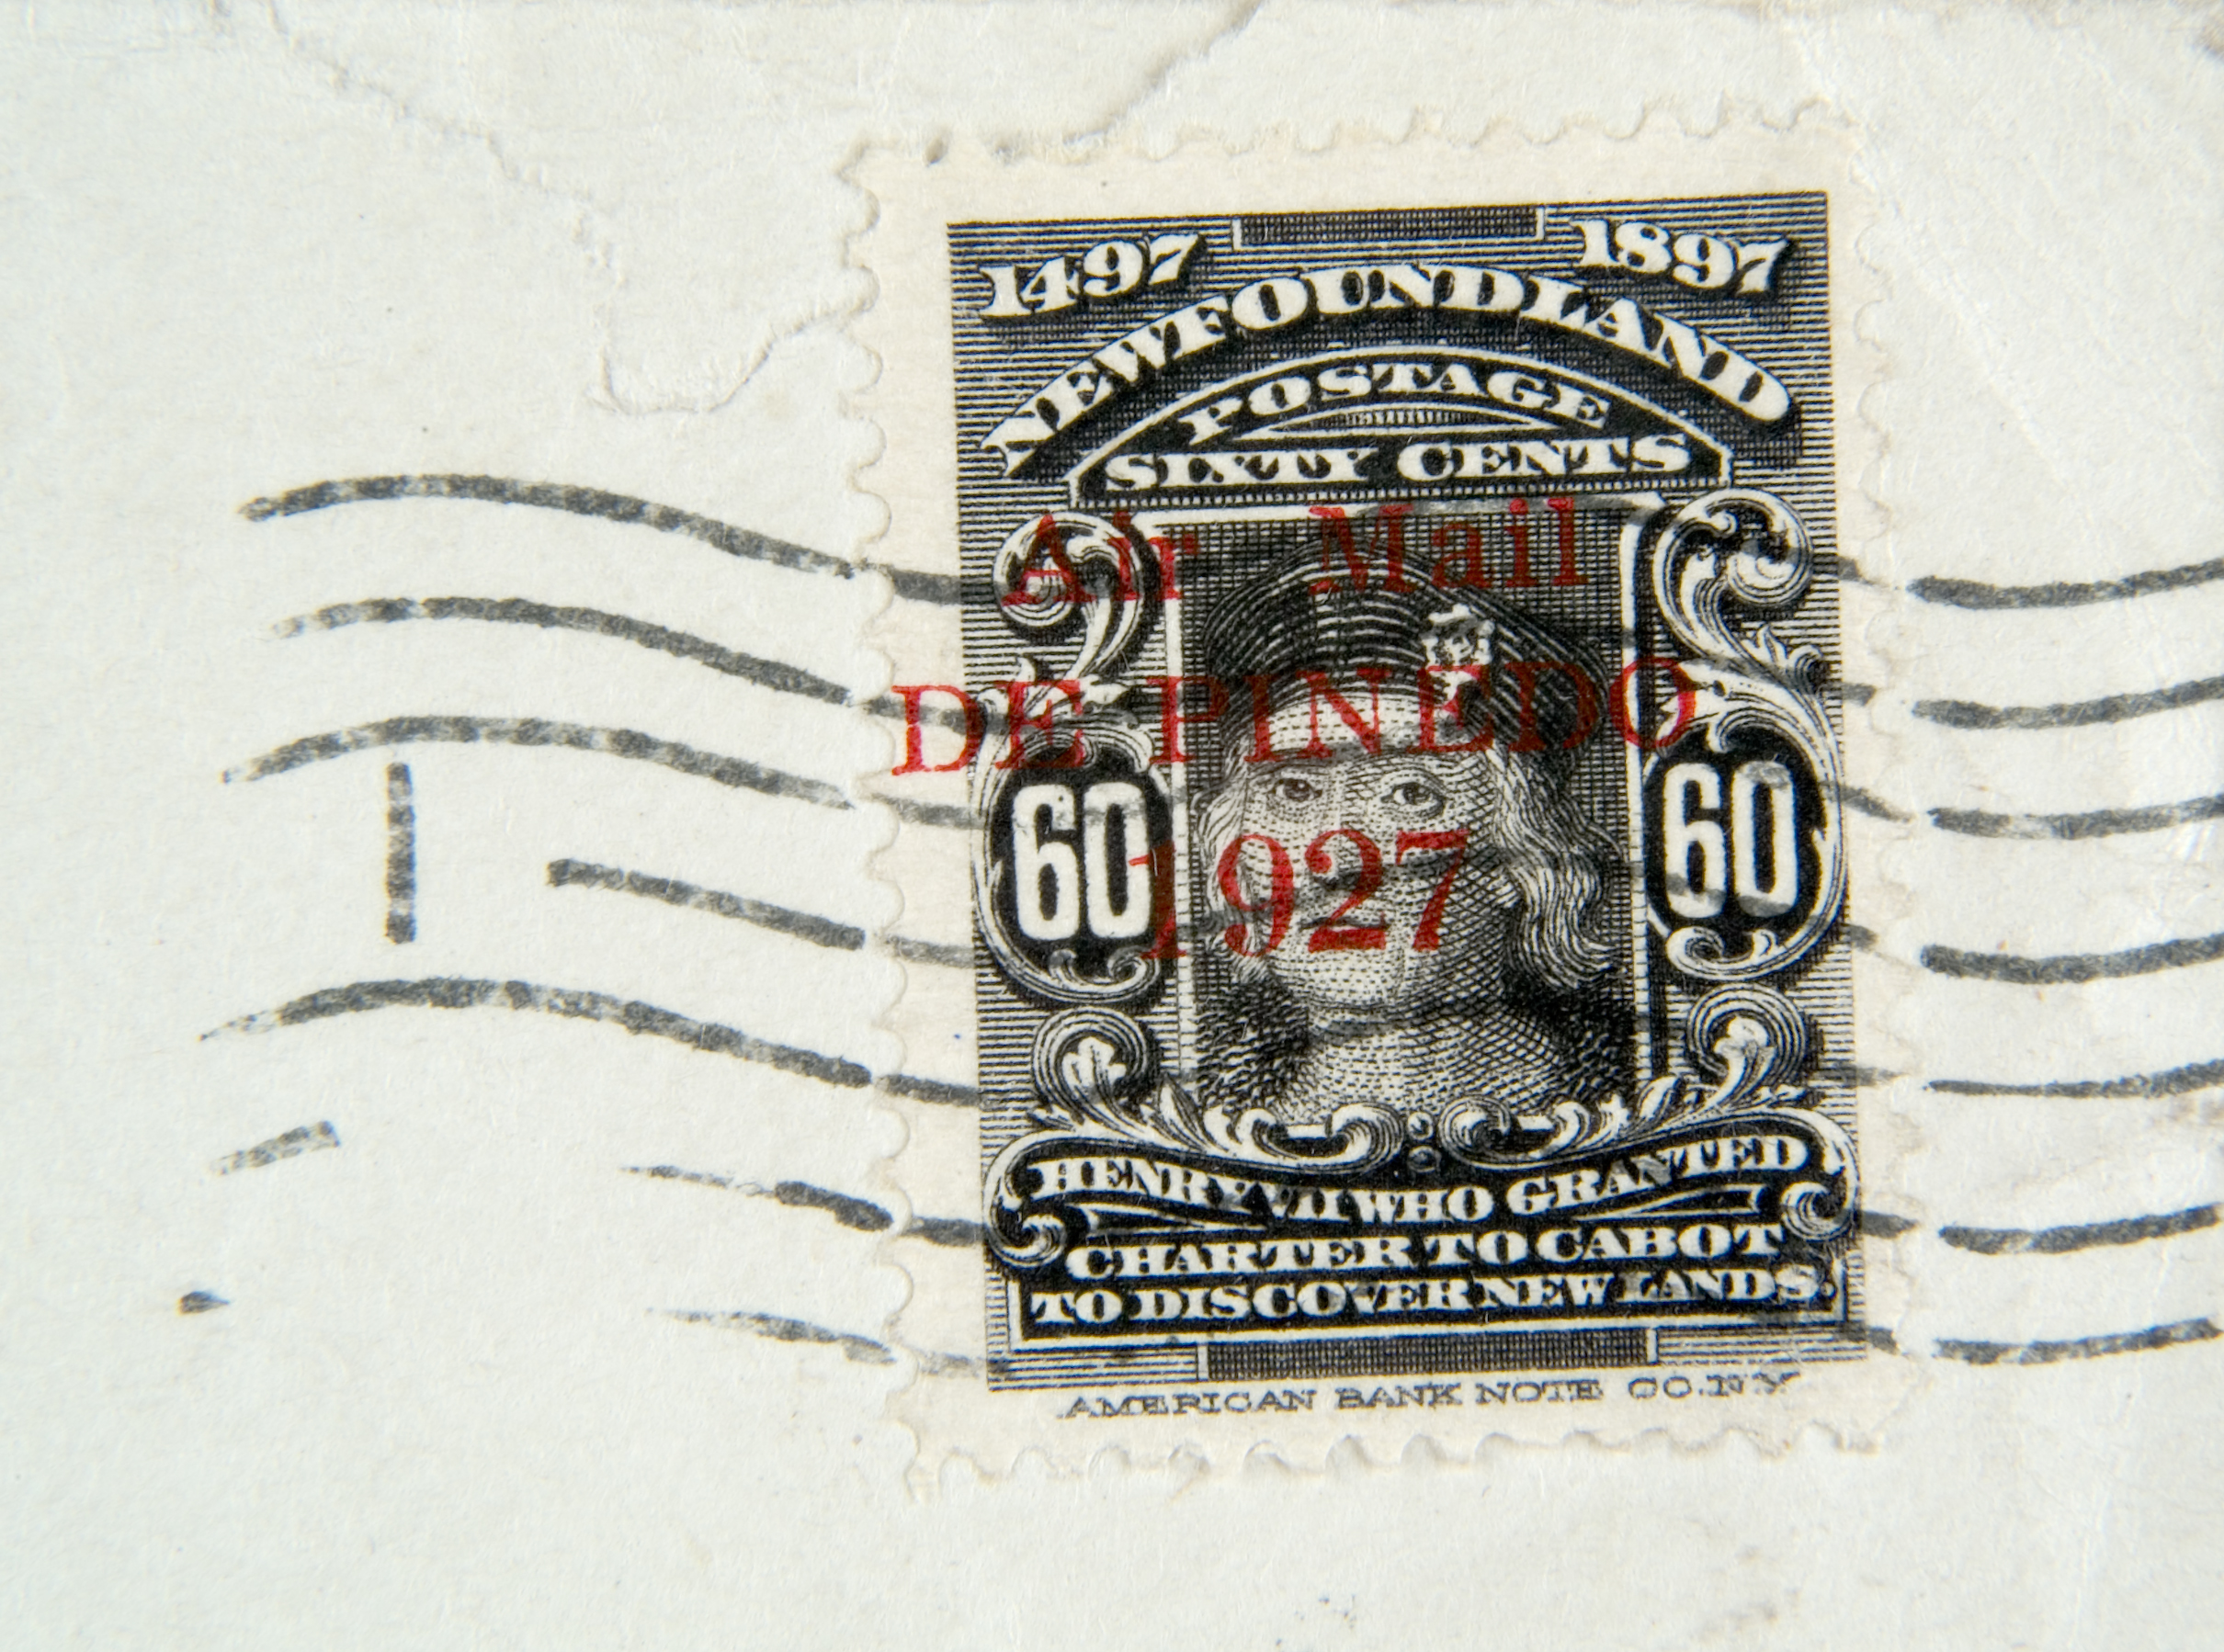  Commission: Methuen / The Queens Stamp Collection 